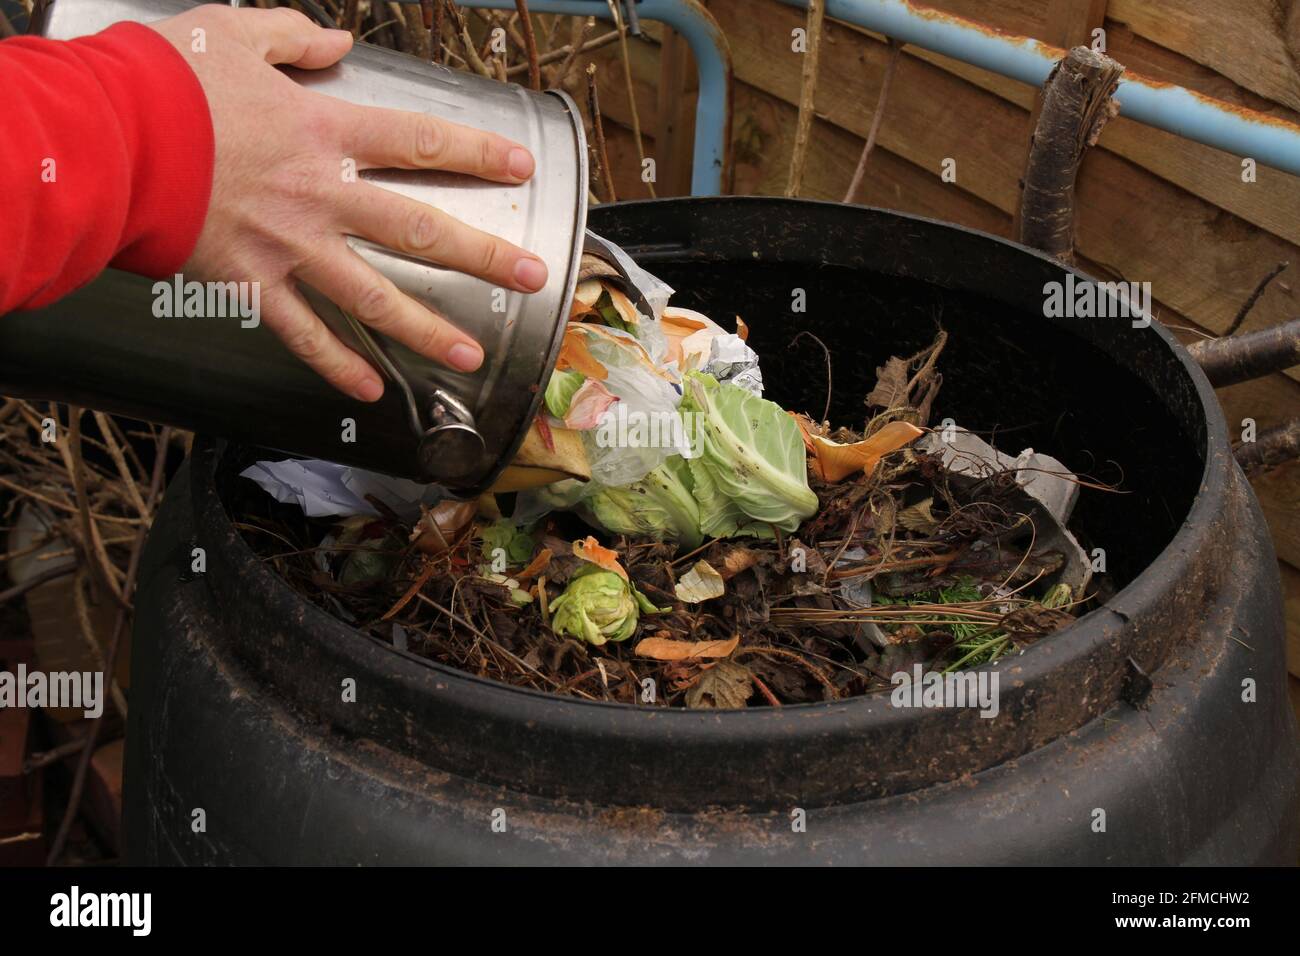 Emptying the contents of a kitchen compost bin into an outdoor compost bin,  to produce environmentally friendly garden compost and reduce waste. Stock Photo